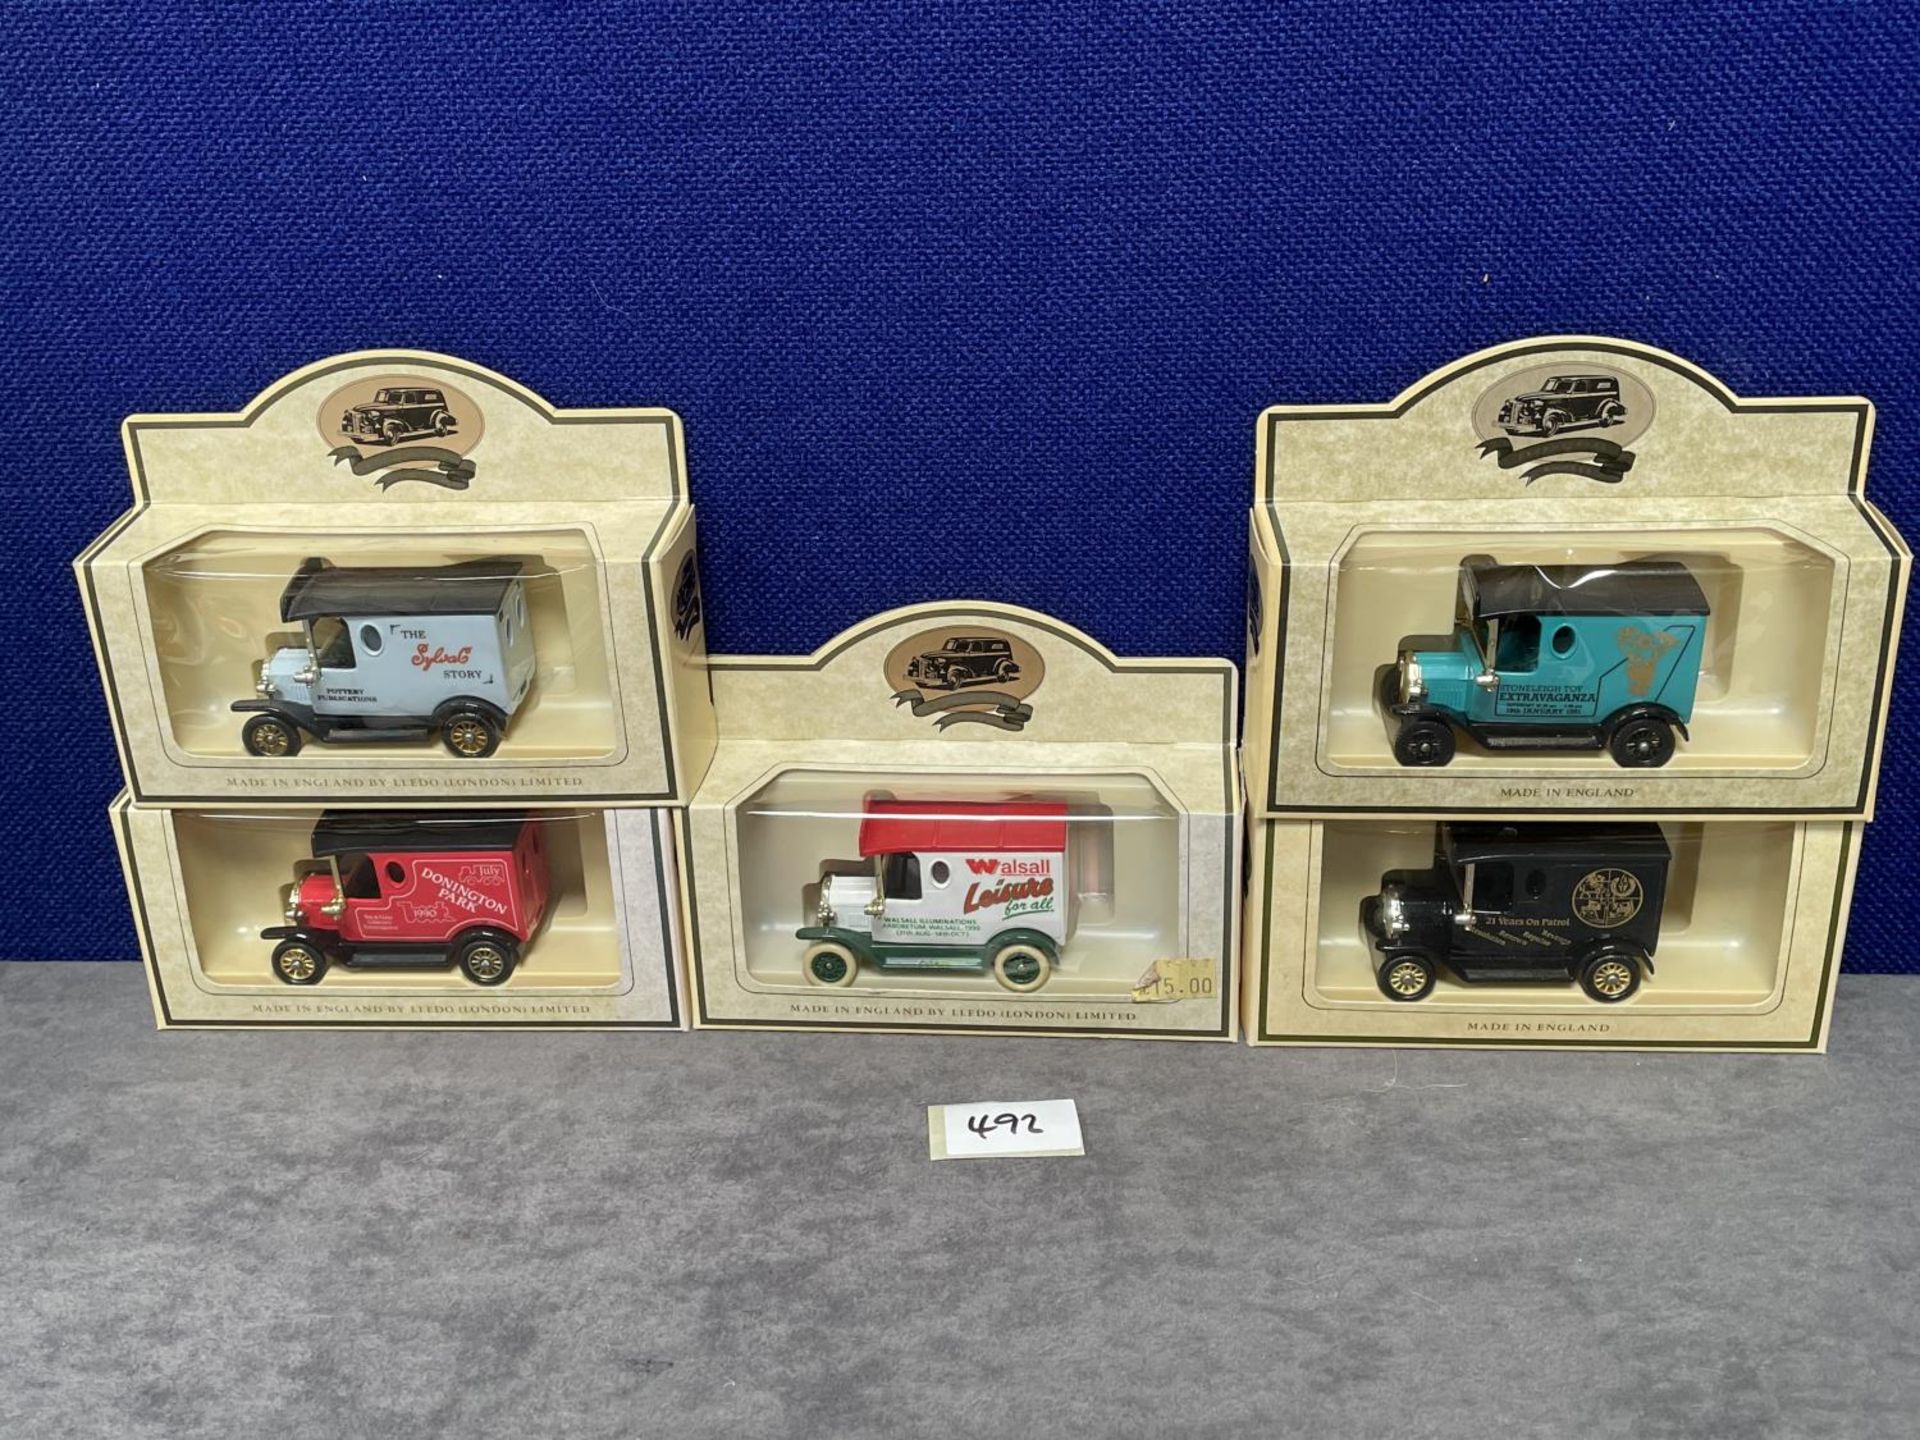 5 x Lledo Diecast Vehicles Individually Boxed Advertising Stoneleigh Toy Extravaganza / Walsall